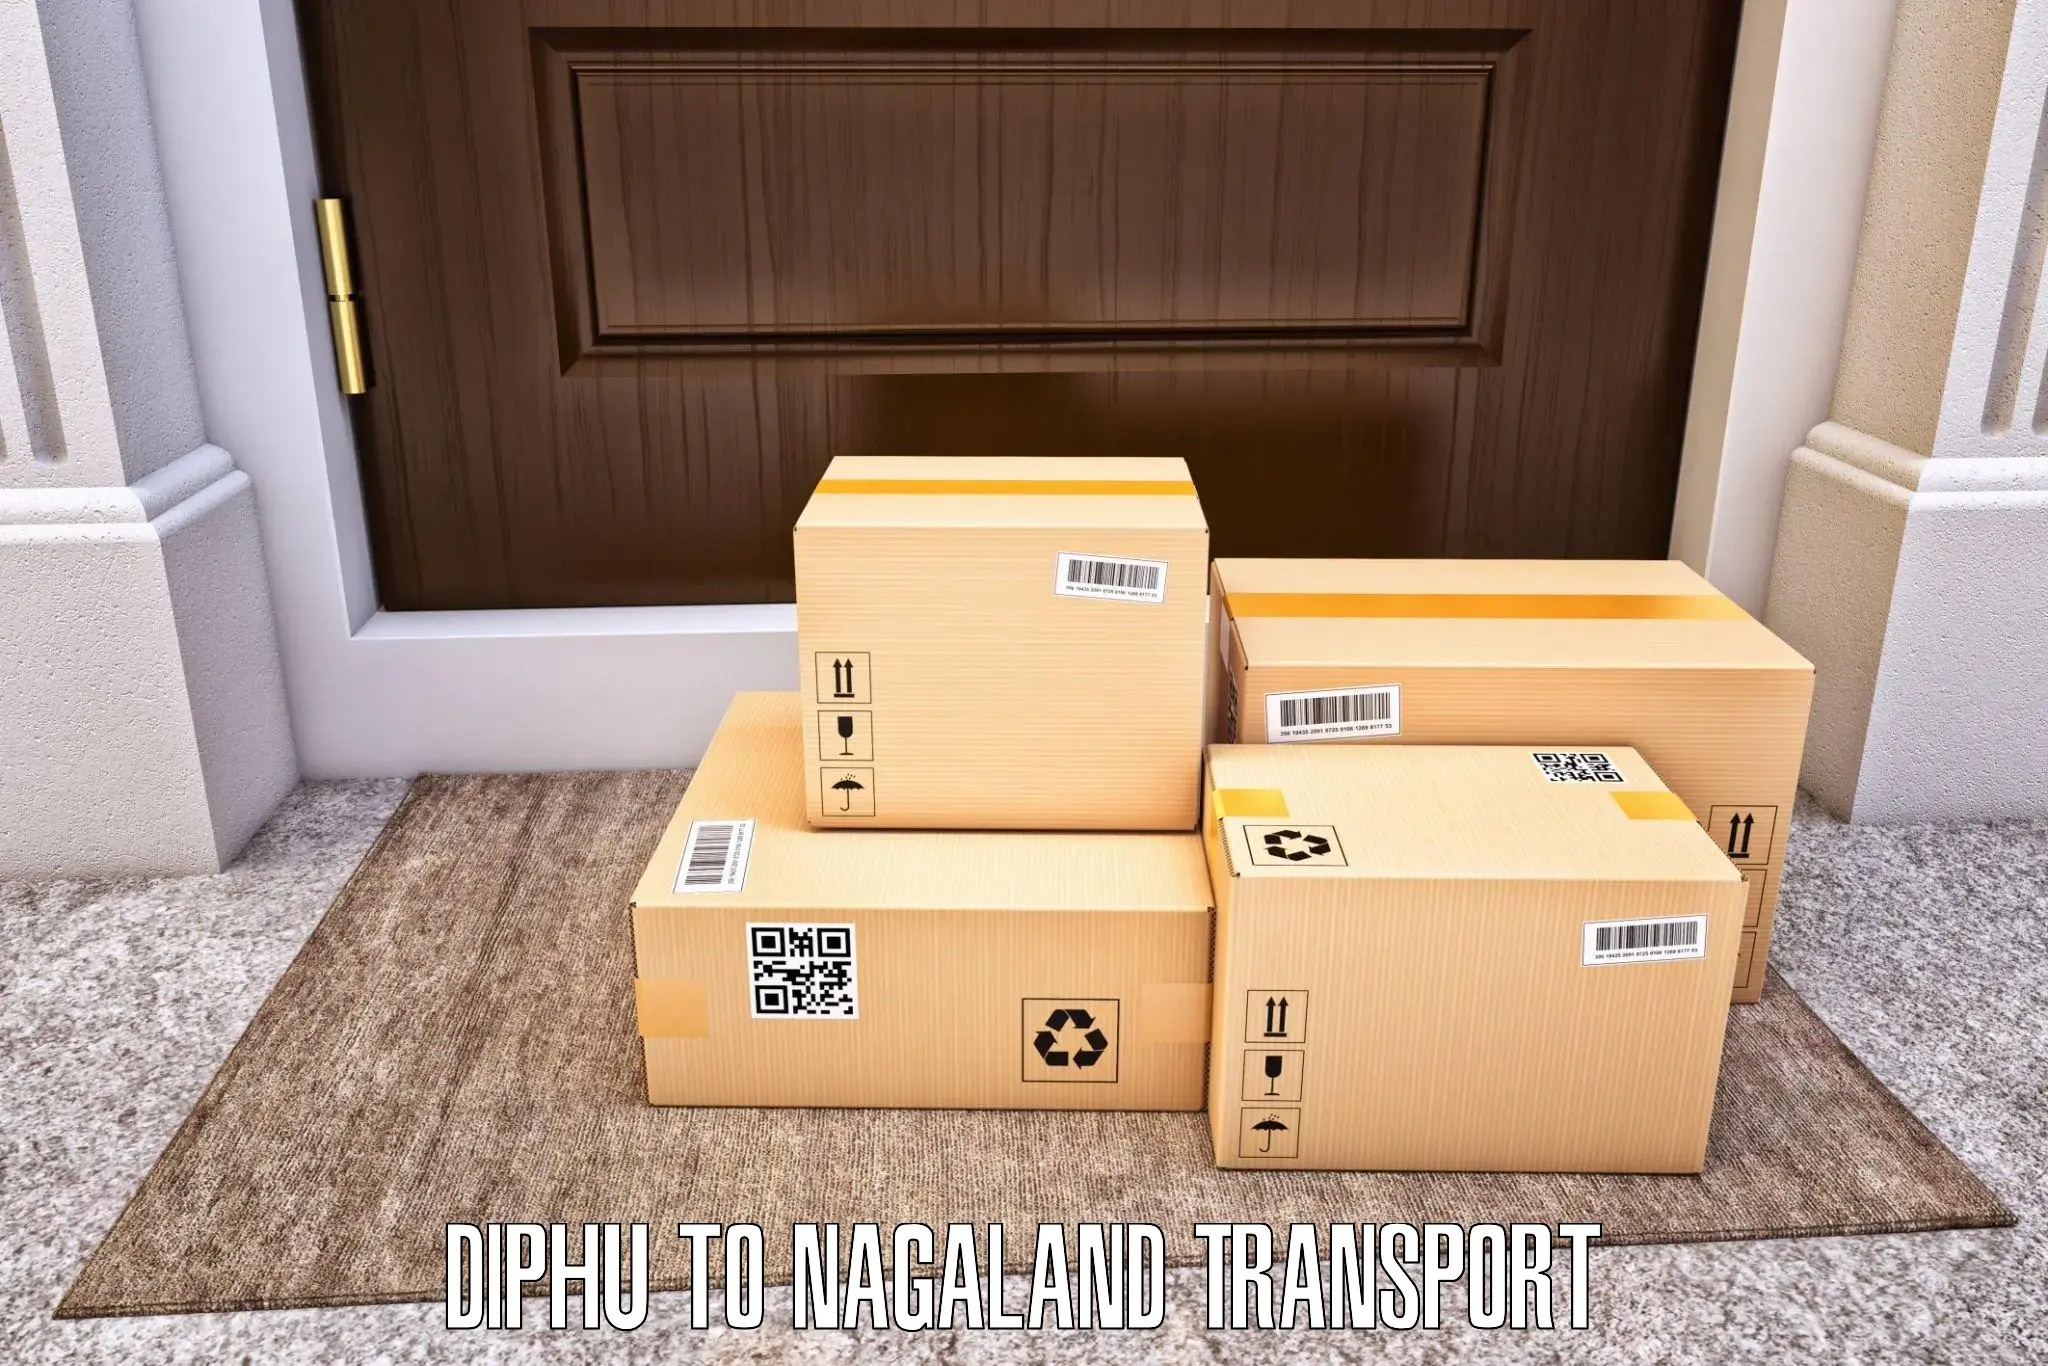 Commercial transport service Diphu to Nagaland